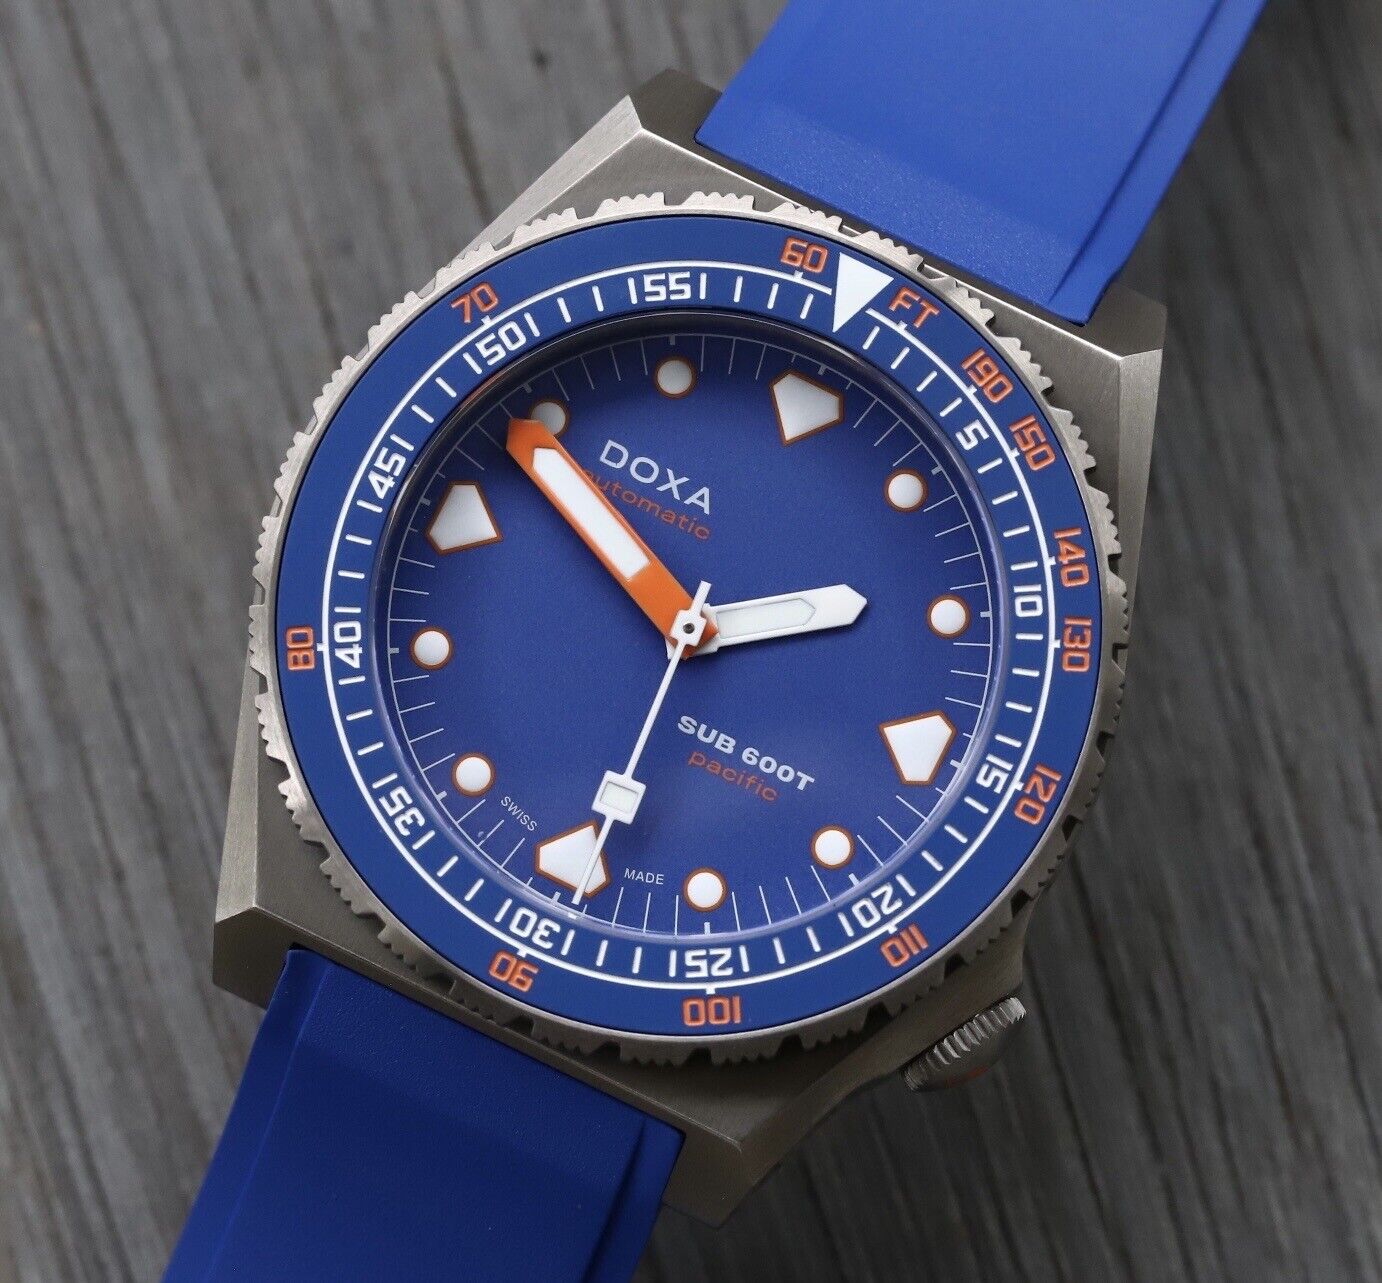 Time & Tide x Doxa SUB 600T ‘Pacific’ Limited Edition - 2021